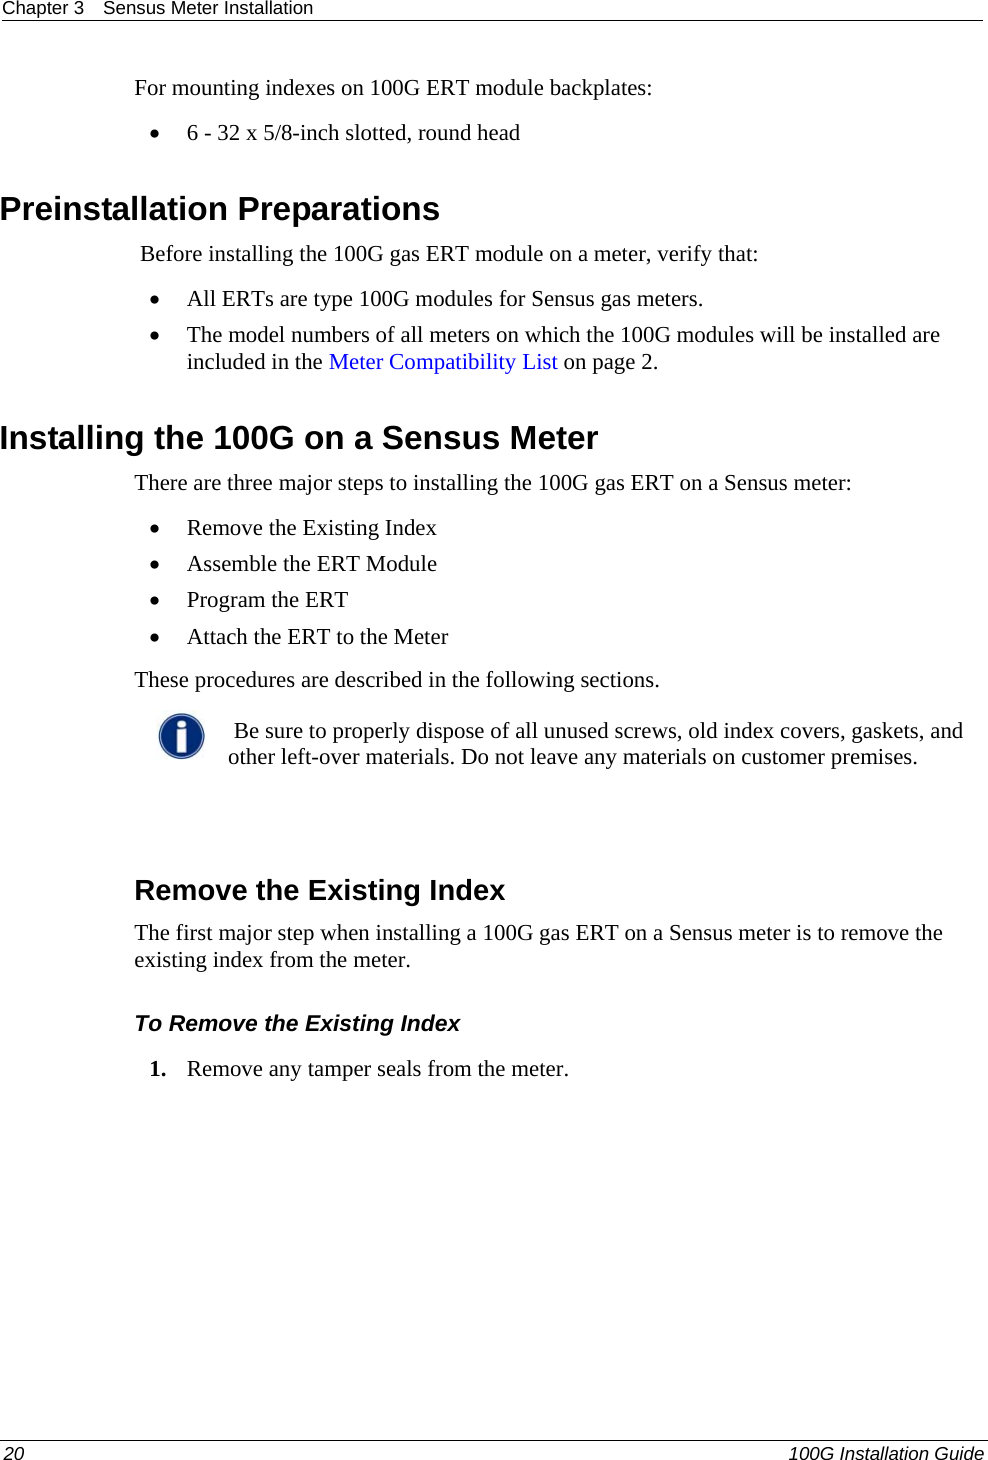 Chapter 3  Sensus Meter Installation  For mounting indexes on 100G ERT module backplates:  • 6 - 32 x 5/8-inch slotted, round head  Preinstallation Preparations  Before installing the 100G gas ERT module on a meter, verify that:  • All ERTs are type 100G modules for Sensus gas meters.  • The model numbers of all meters on which the 100G modules will be installed are included in the Meter Compatibility List on page 2.   Installing the 100G on a Sensus Meter There are three major steps to installing the 100G gas ERT on a Sensus meter:  • Remove the Existing Index • Assemble the ERT Module  • Program the ERT • Attach the ERT to the Meter These procedures are described in the following sections.    Be sure to properly dispose of all unused screws, old index covers, gaskets, and other left-over materials. Do not leave any materials on customer premises.    Remove the Existing Index The first major step when installing a 100G gas ERT on a Sensus meter is to remove the existing index from the meter.  To Remove the Existing Index 1. Remove any tamper seals from the meter.  20   100G Installation Guide  